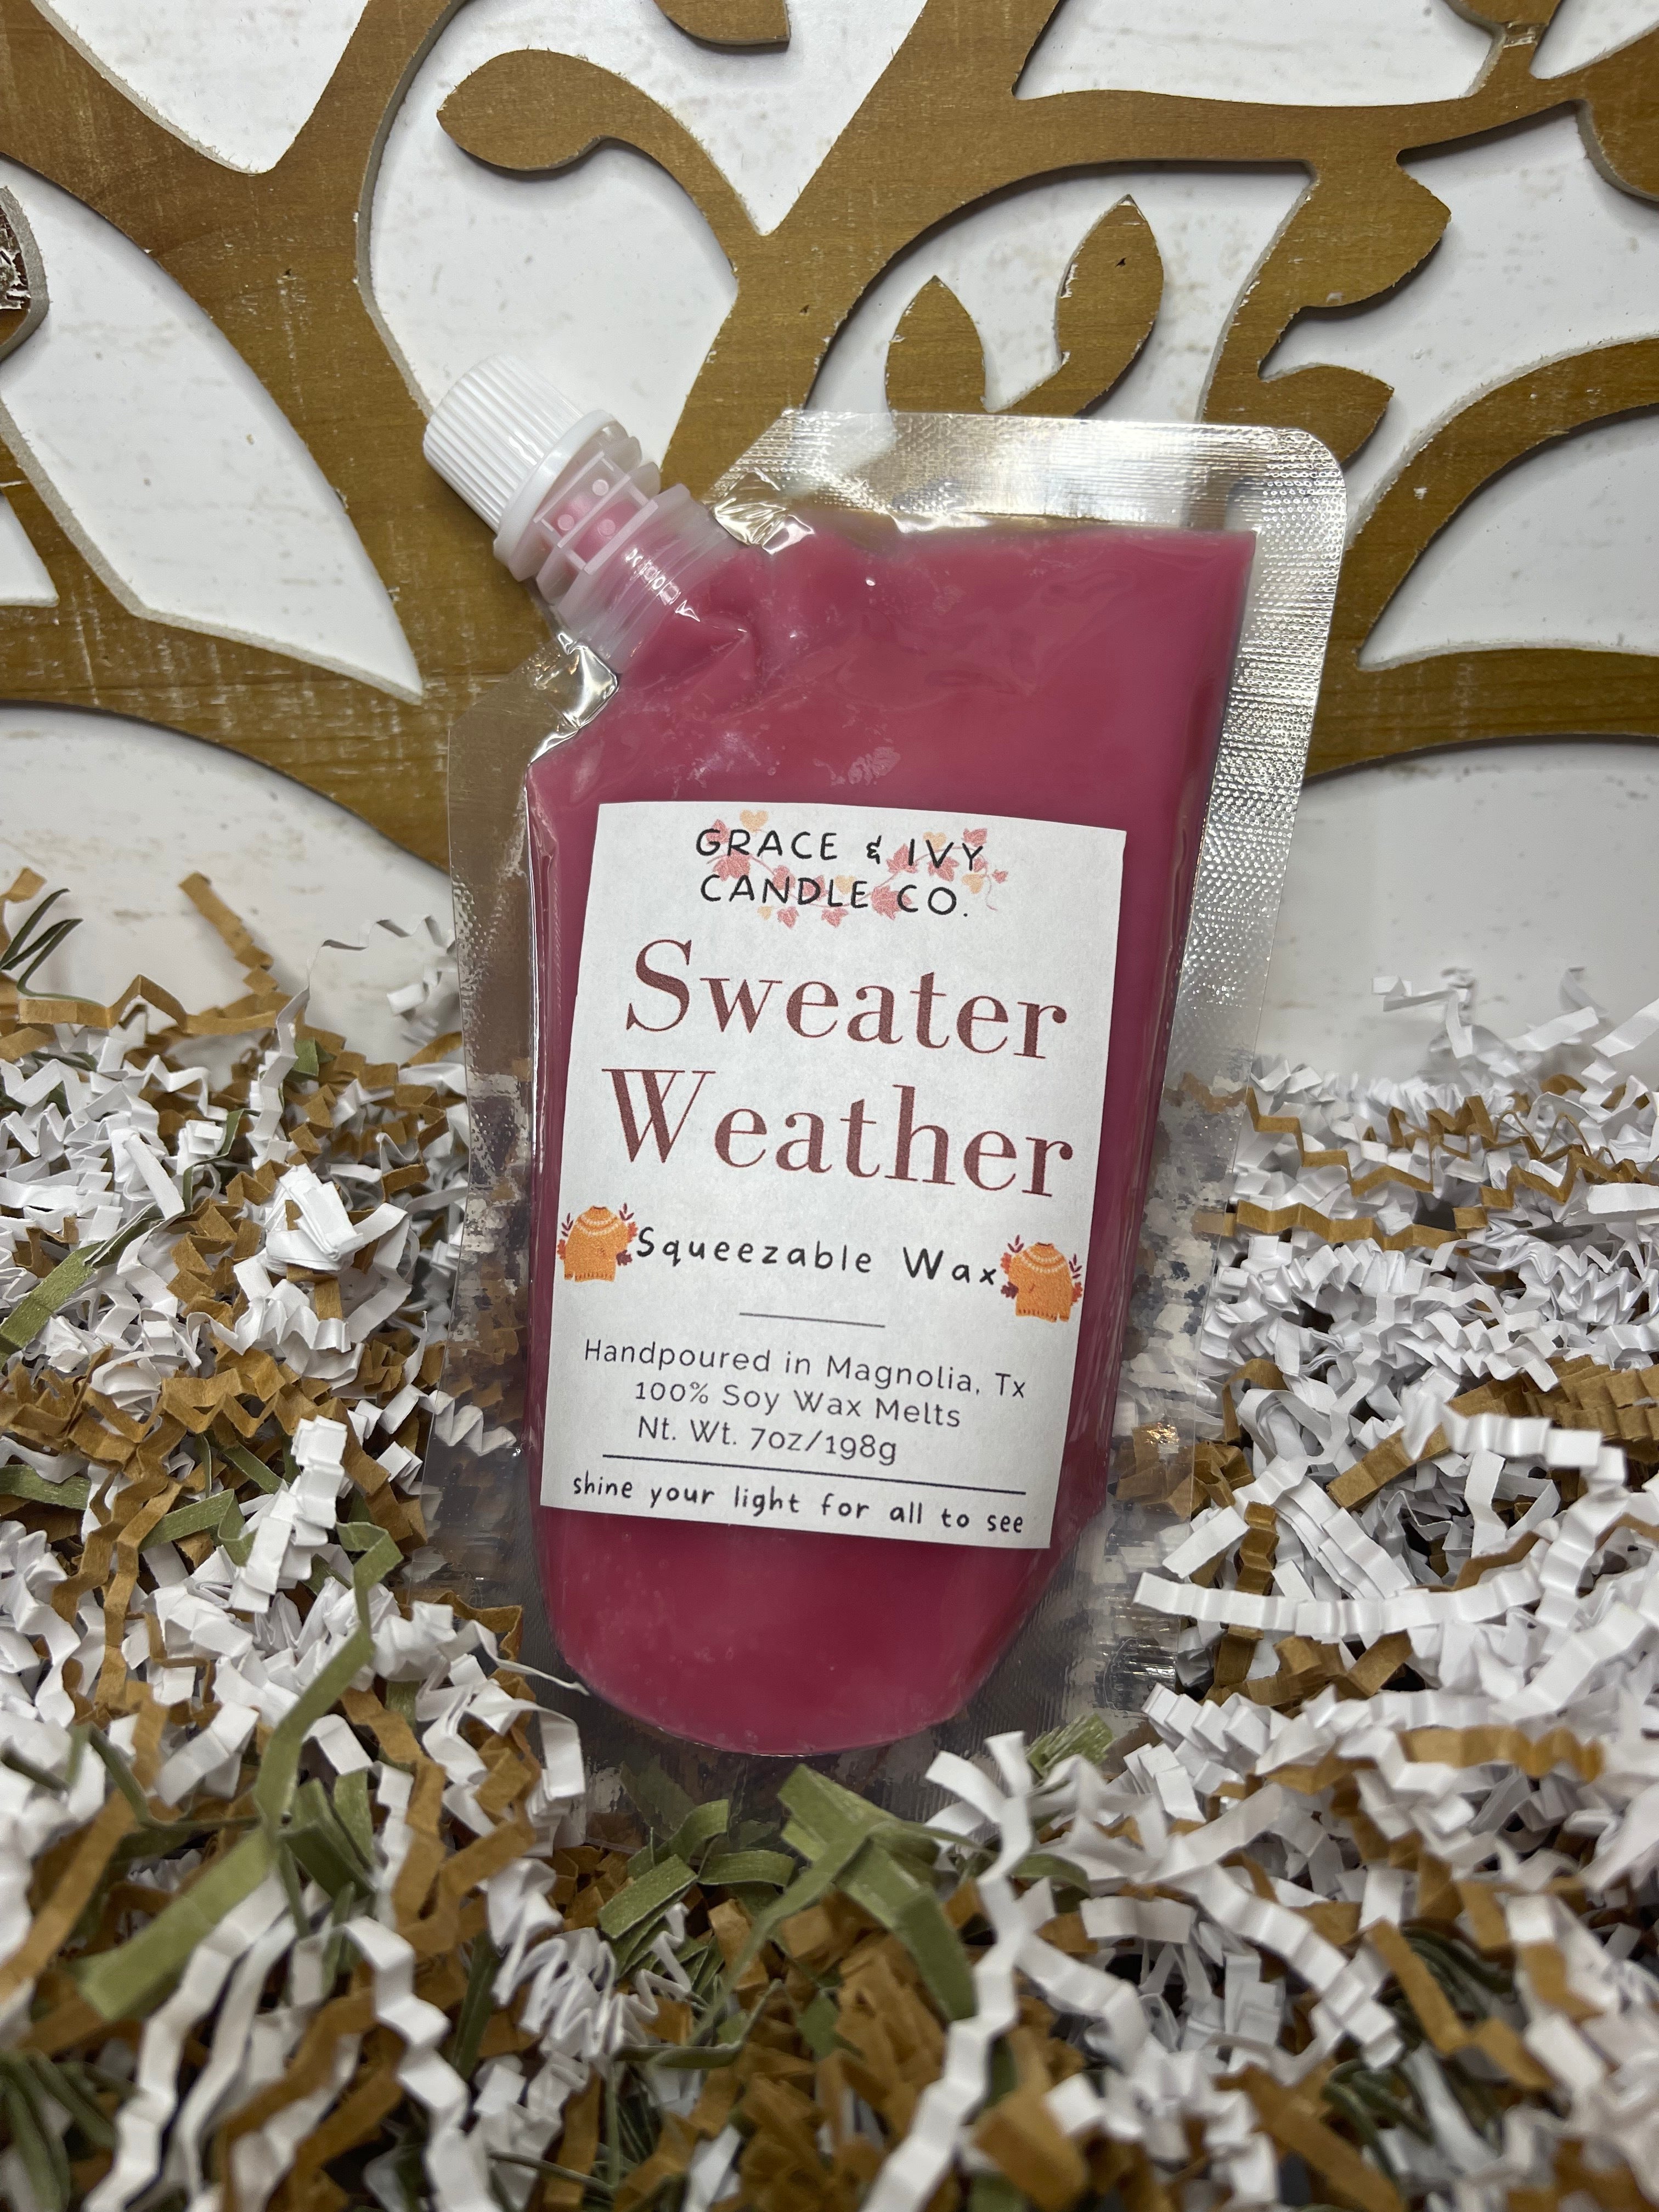 Squeezable Wax Melts – Little Wing Candle Co